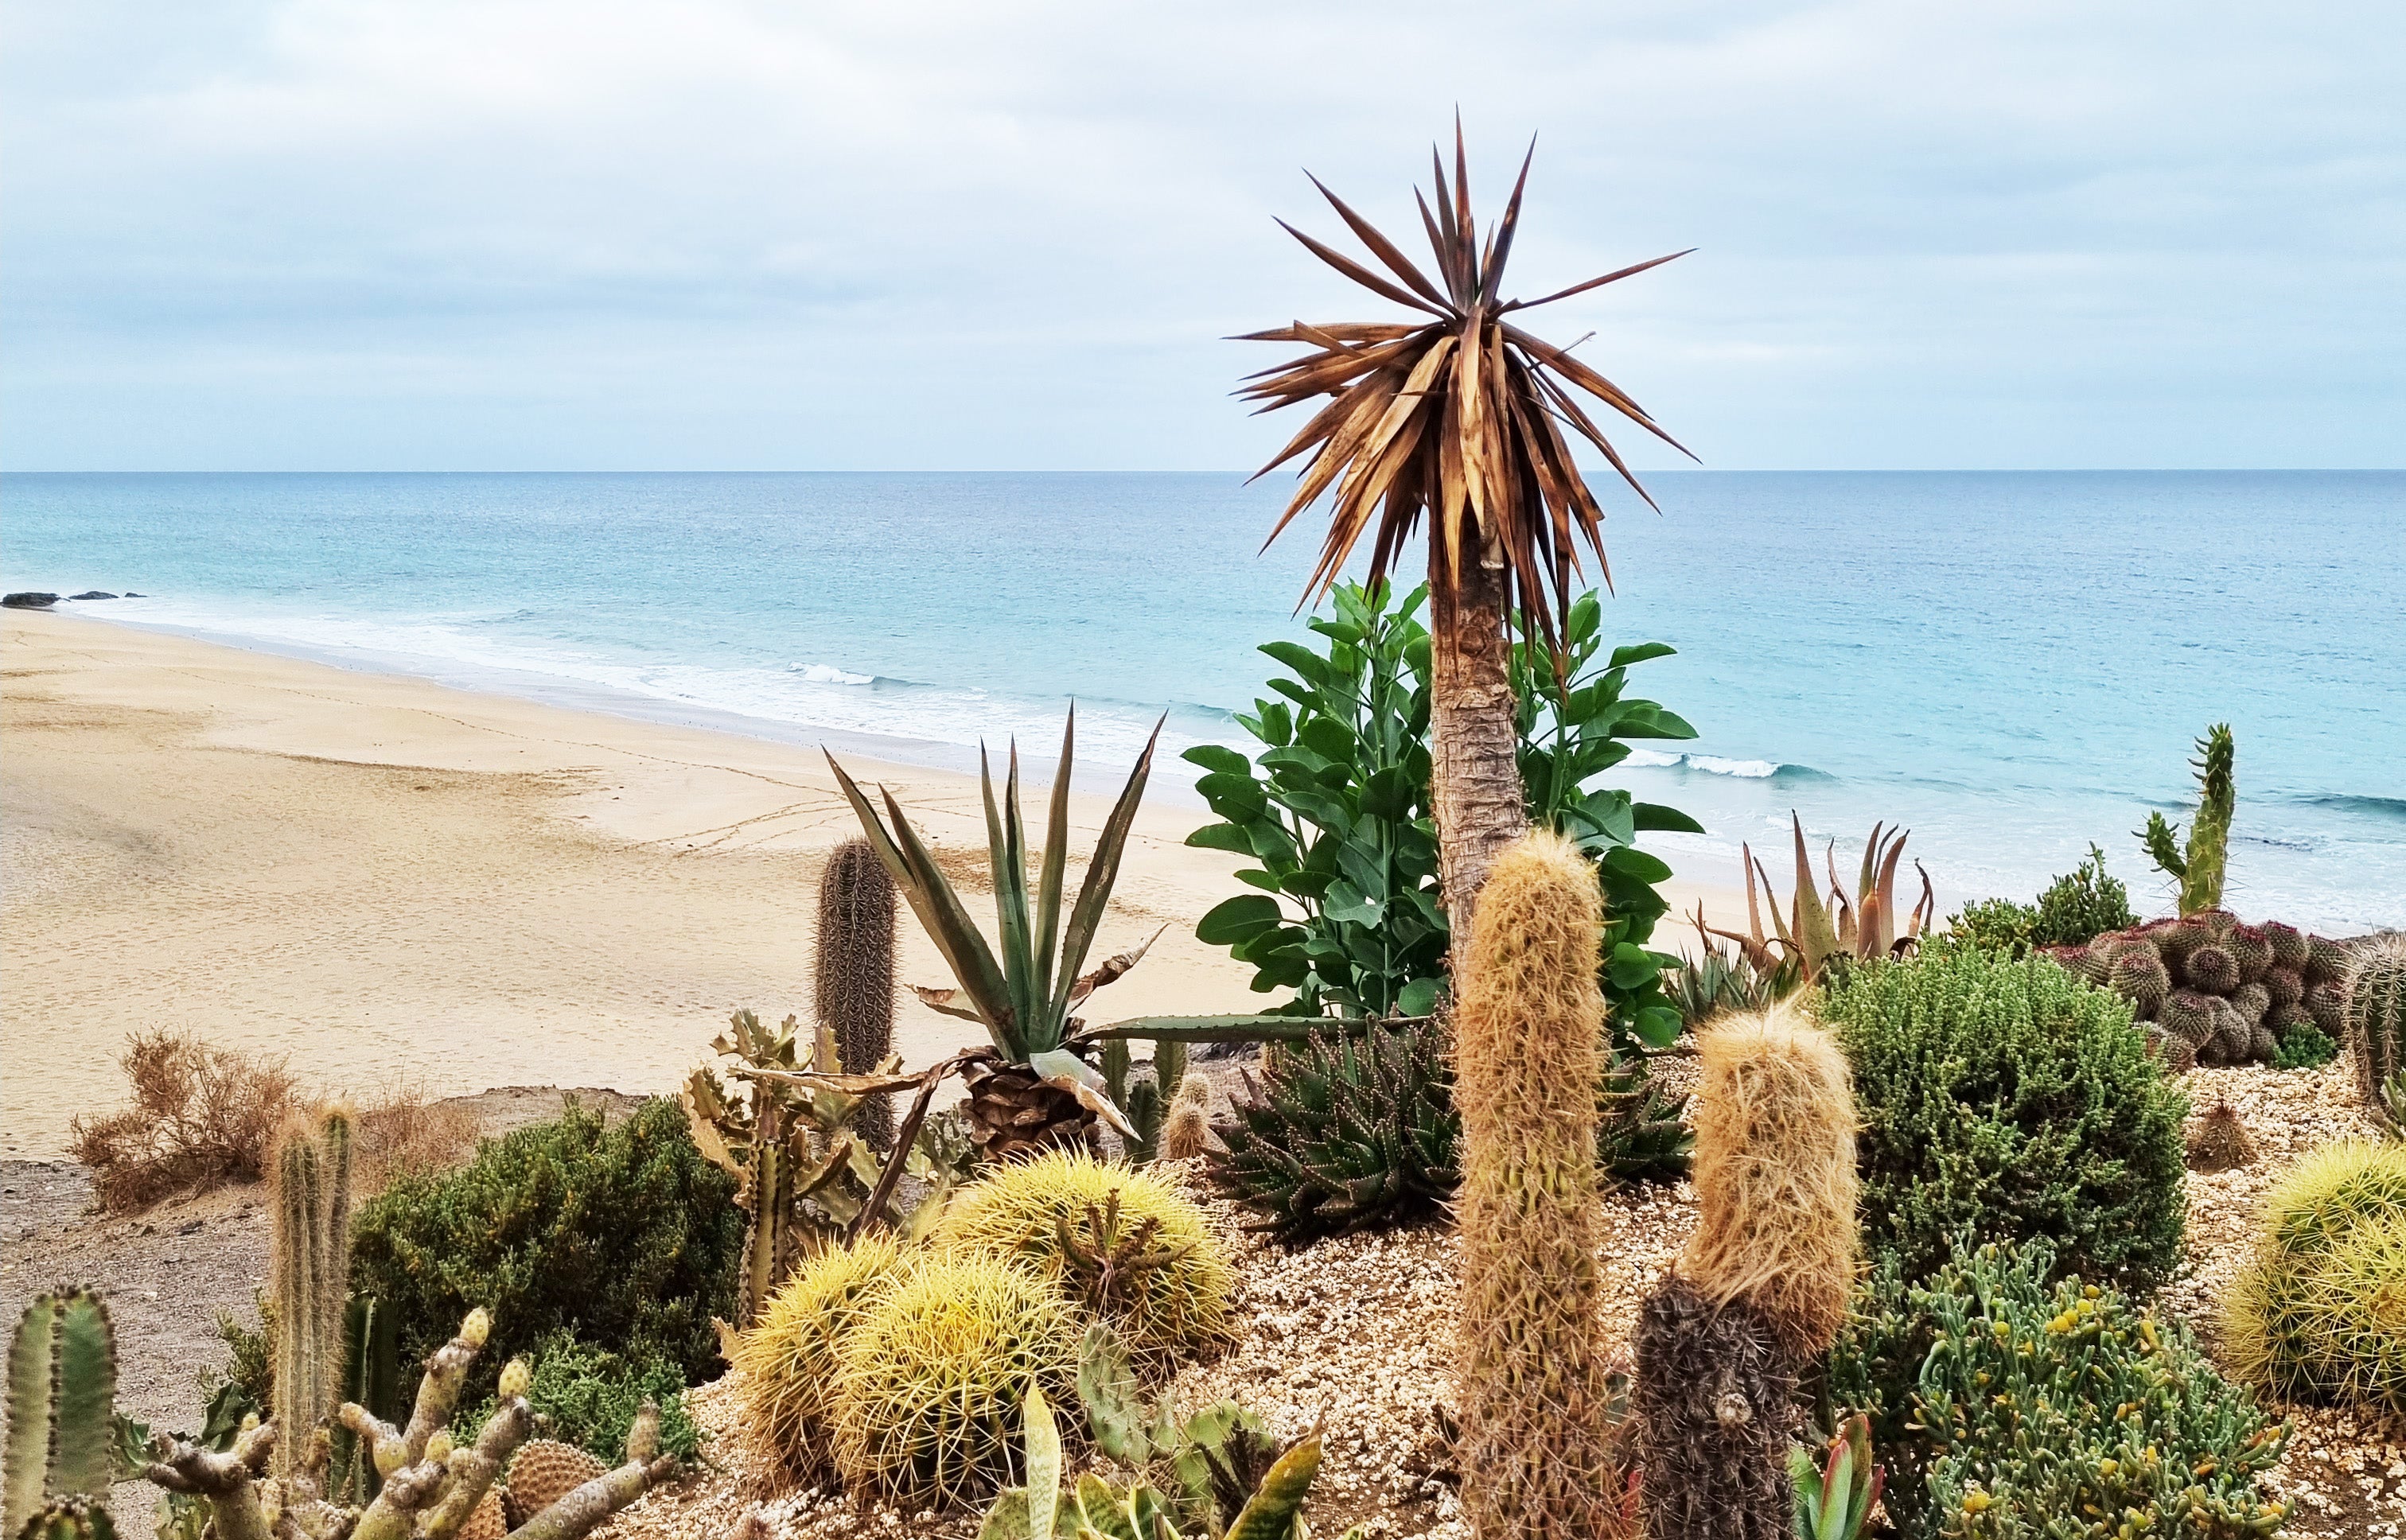 Escape into nature on one of Fuerteventura’s stunning shores